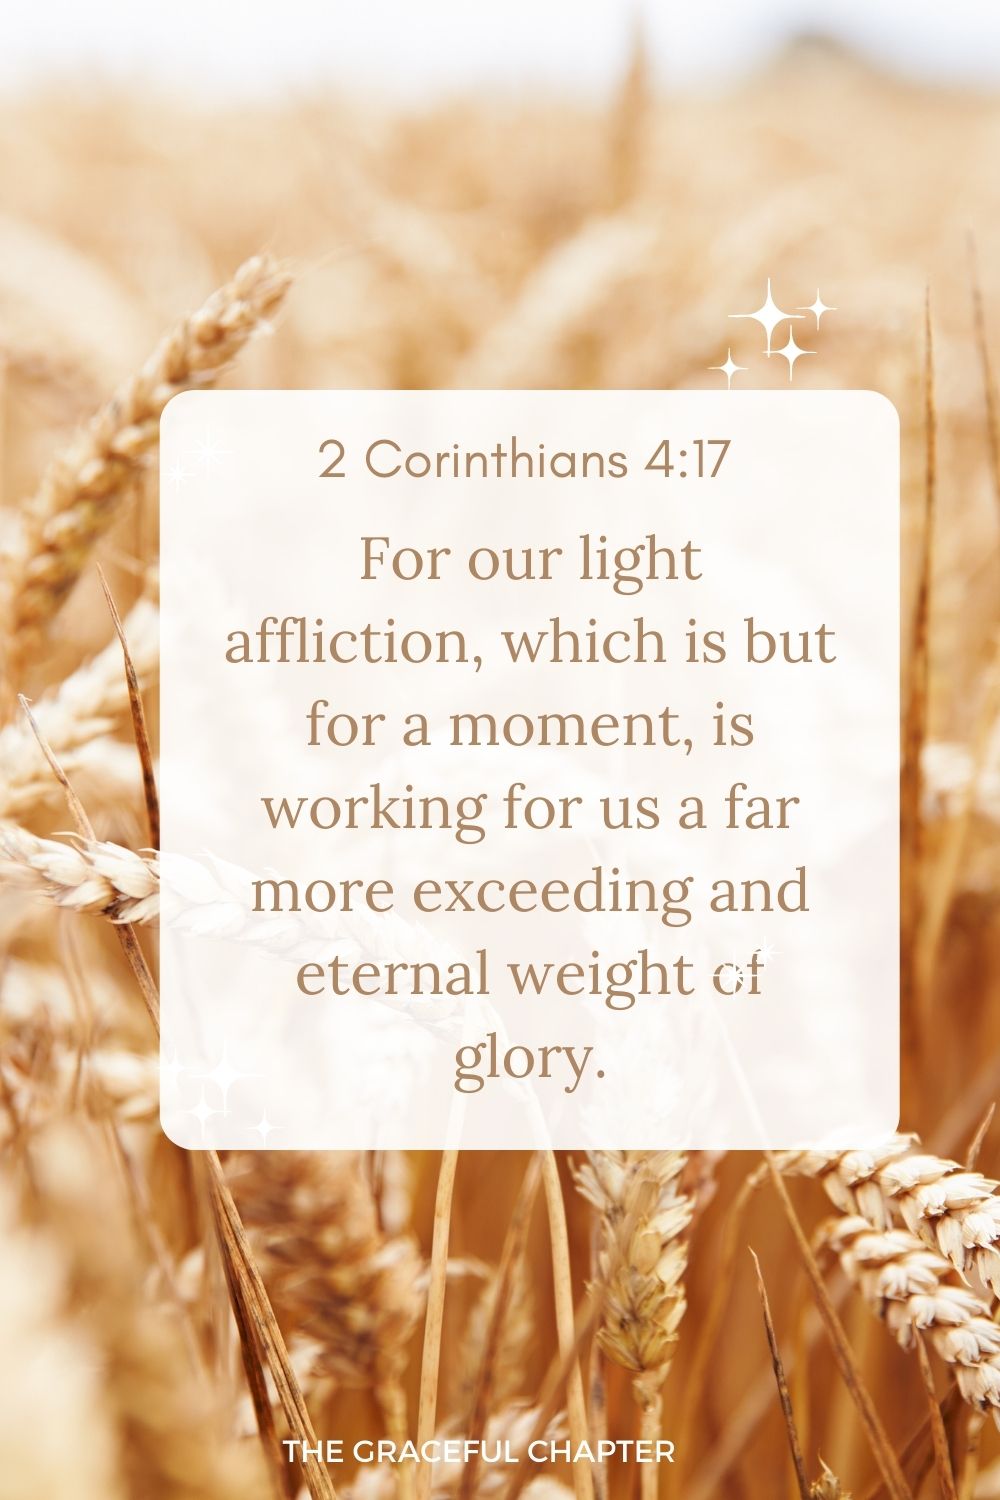 For our light affliction, which is but for a moment, is working for us a far more exceeding and eternal weight of glory. 2 Corinthians 4:17